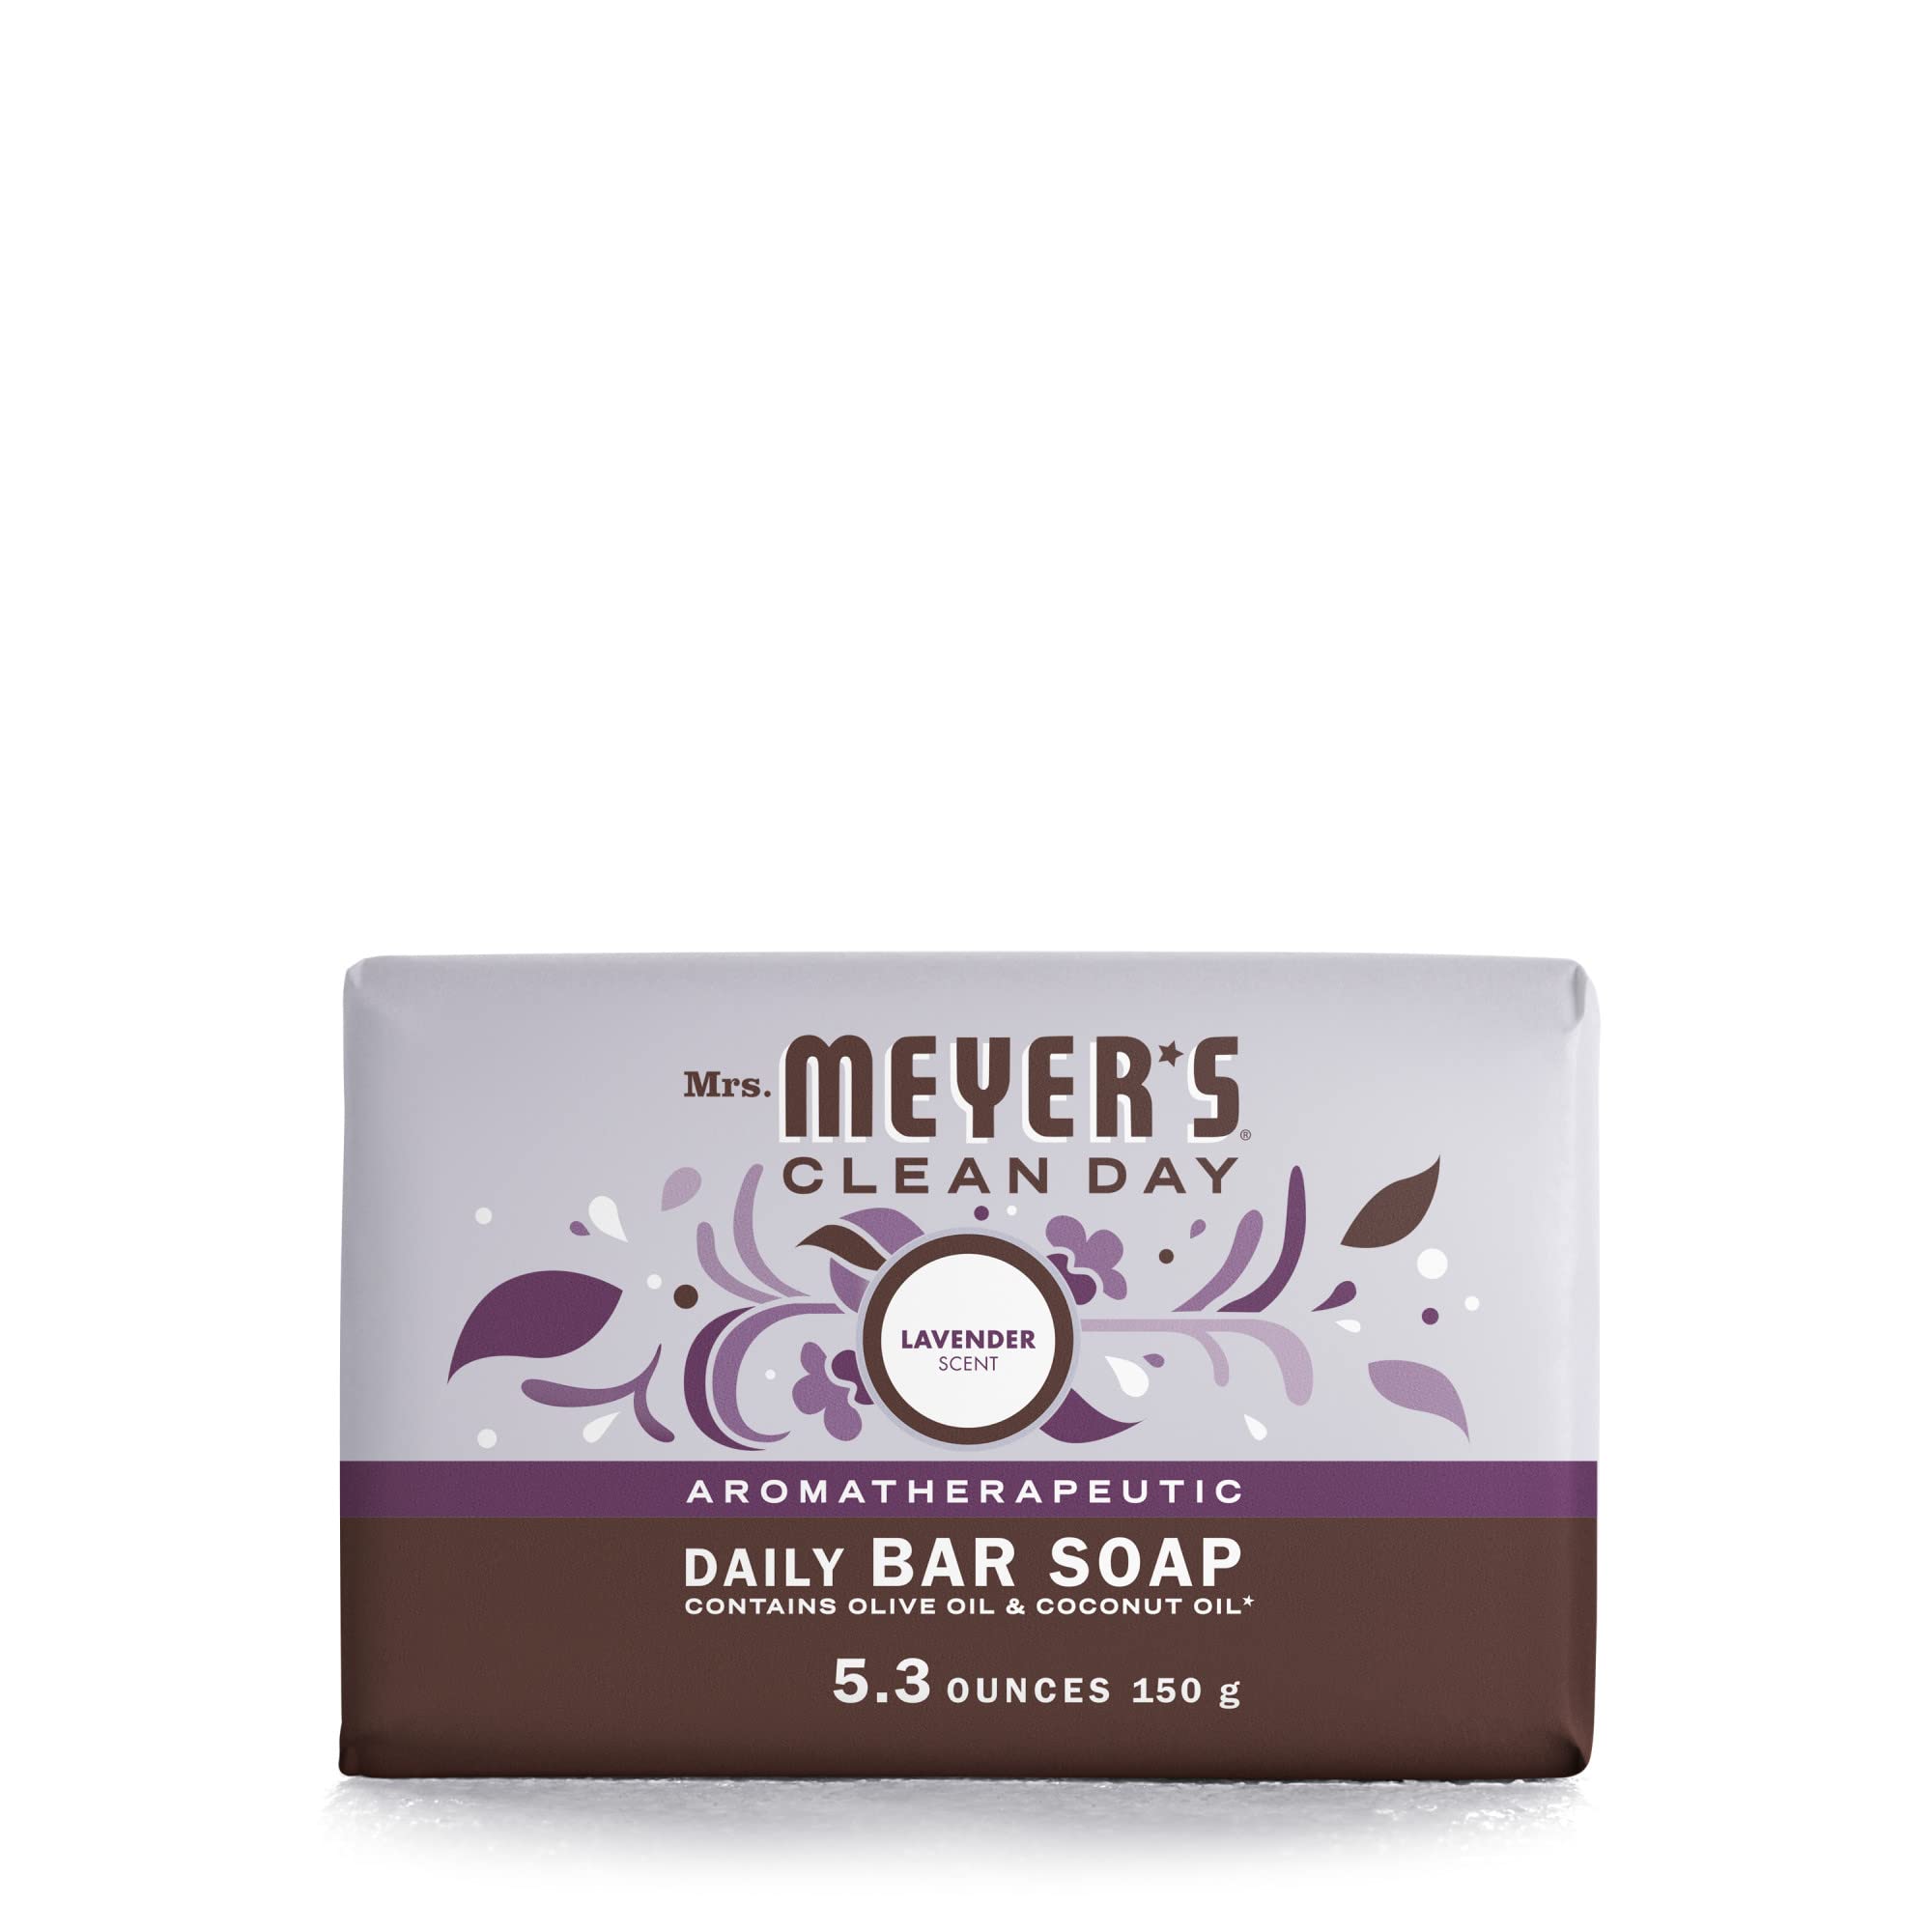 Mrs. Meyer's Bar Soap, Use as Body Wash or Hand Soap, Made with Essential Oils, Lavender, 5.3 oz, 1 Bar